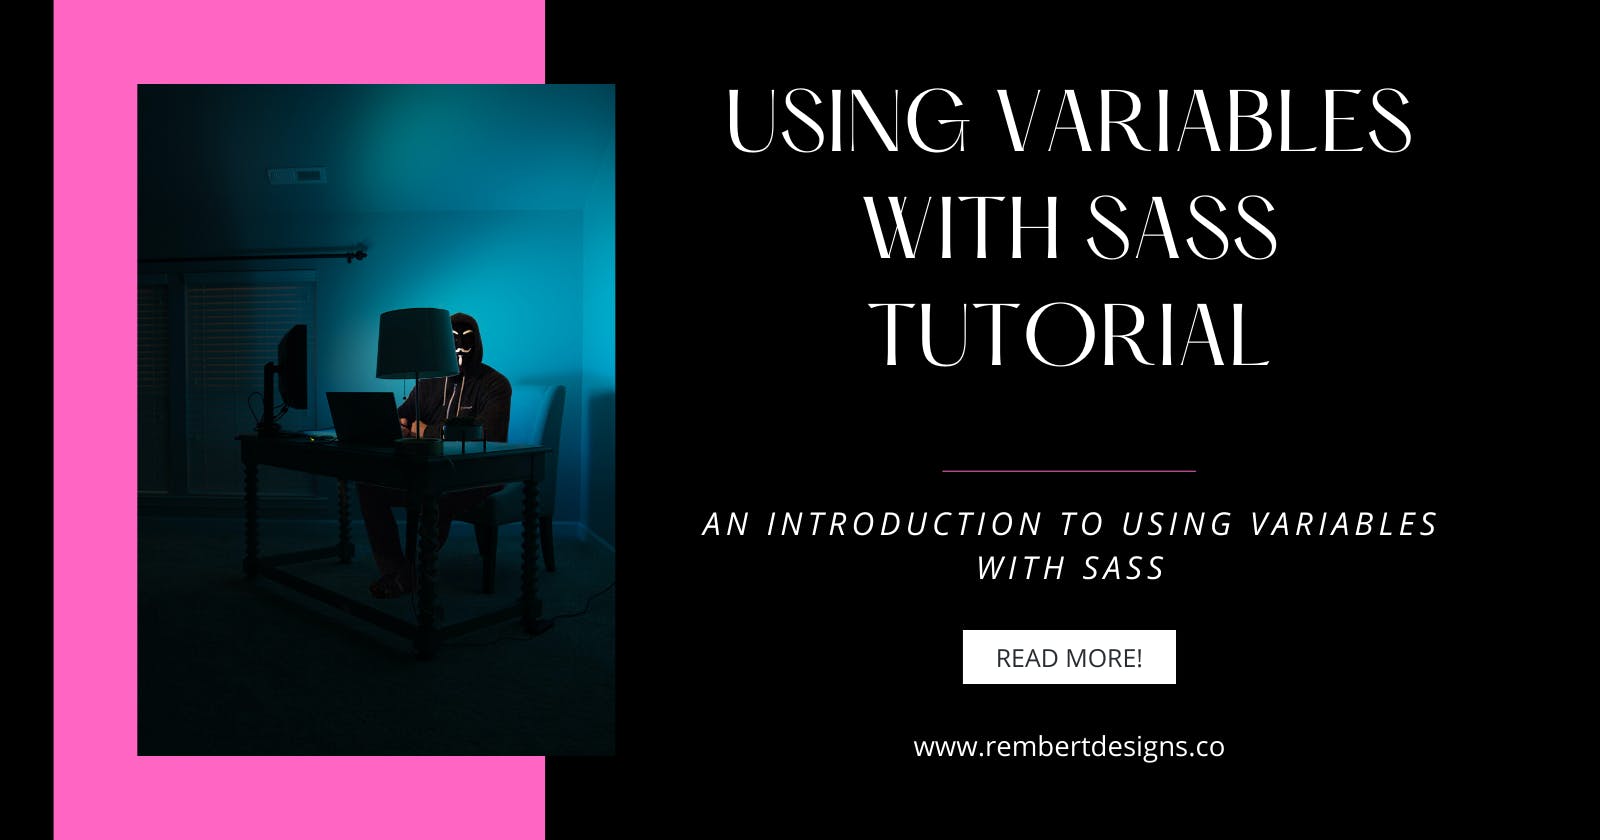 Using Variables with SASS Tutorial